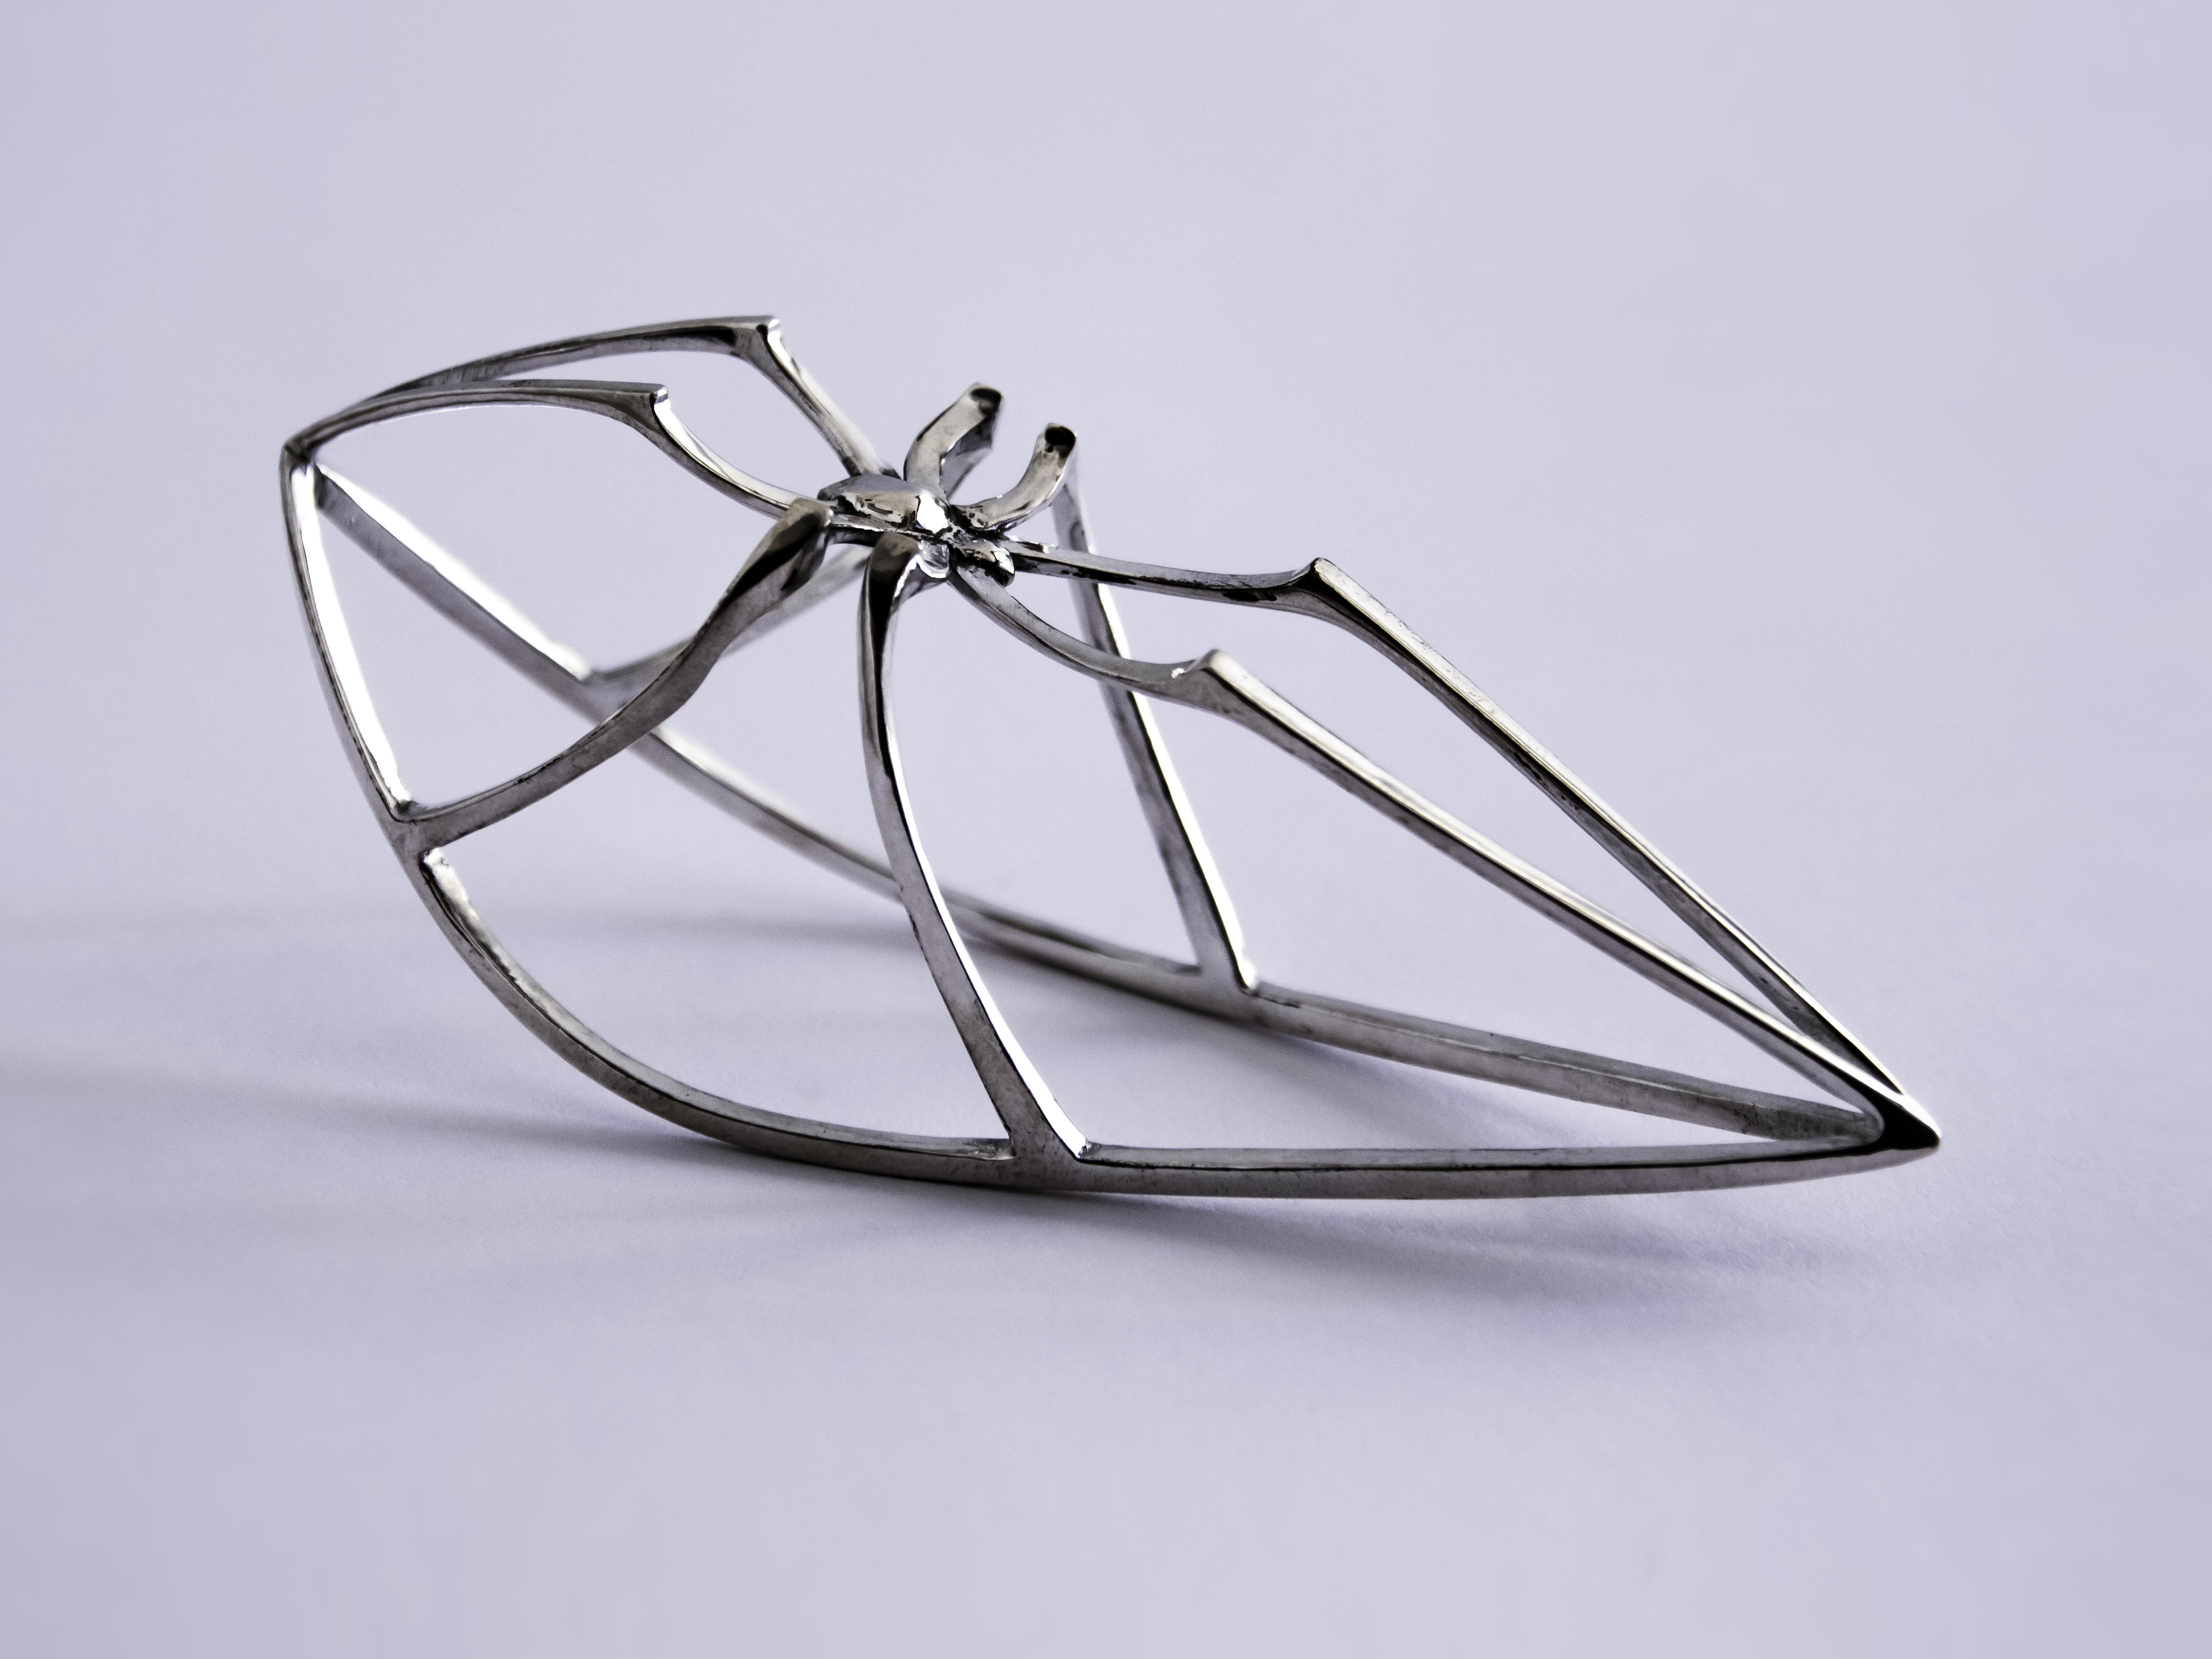 A spindly, silver, spider version of a rocking horse.